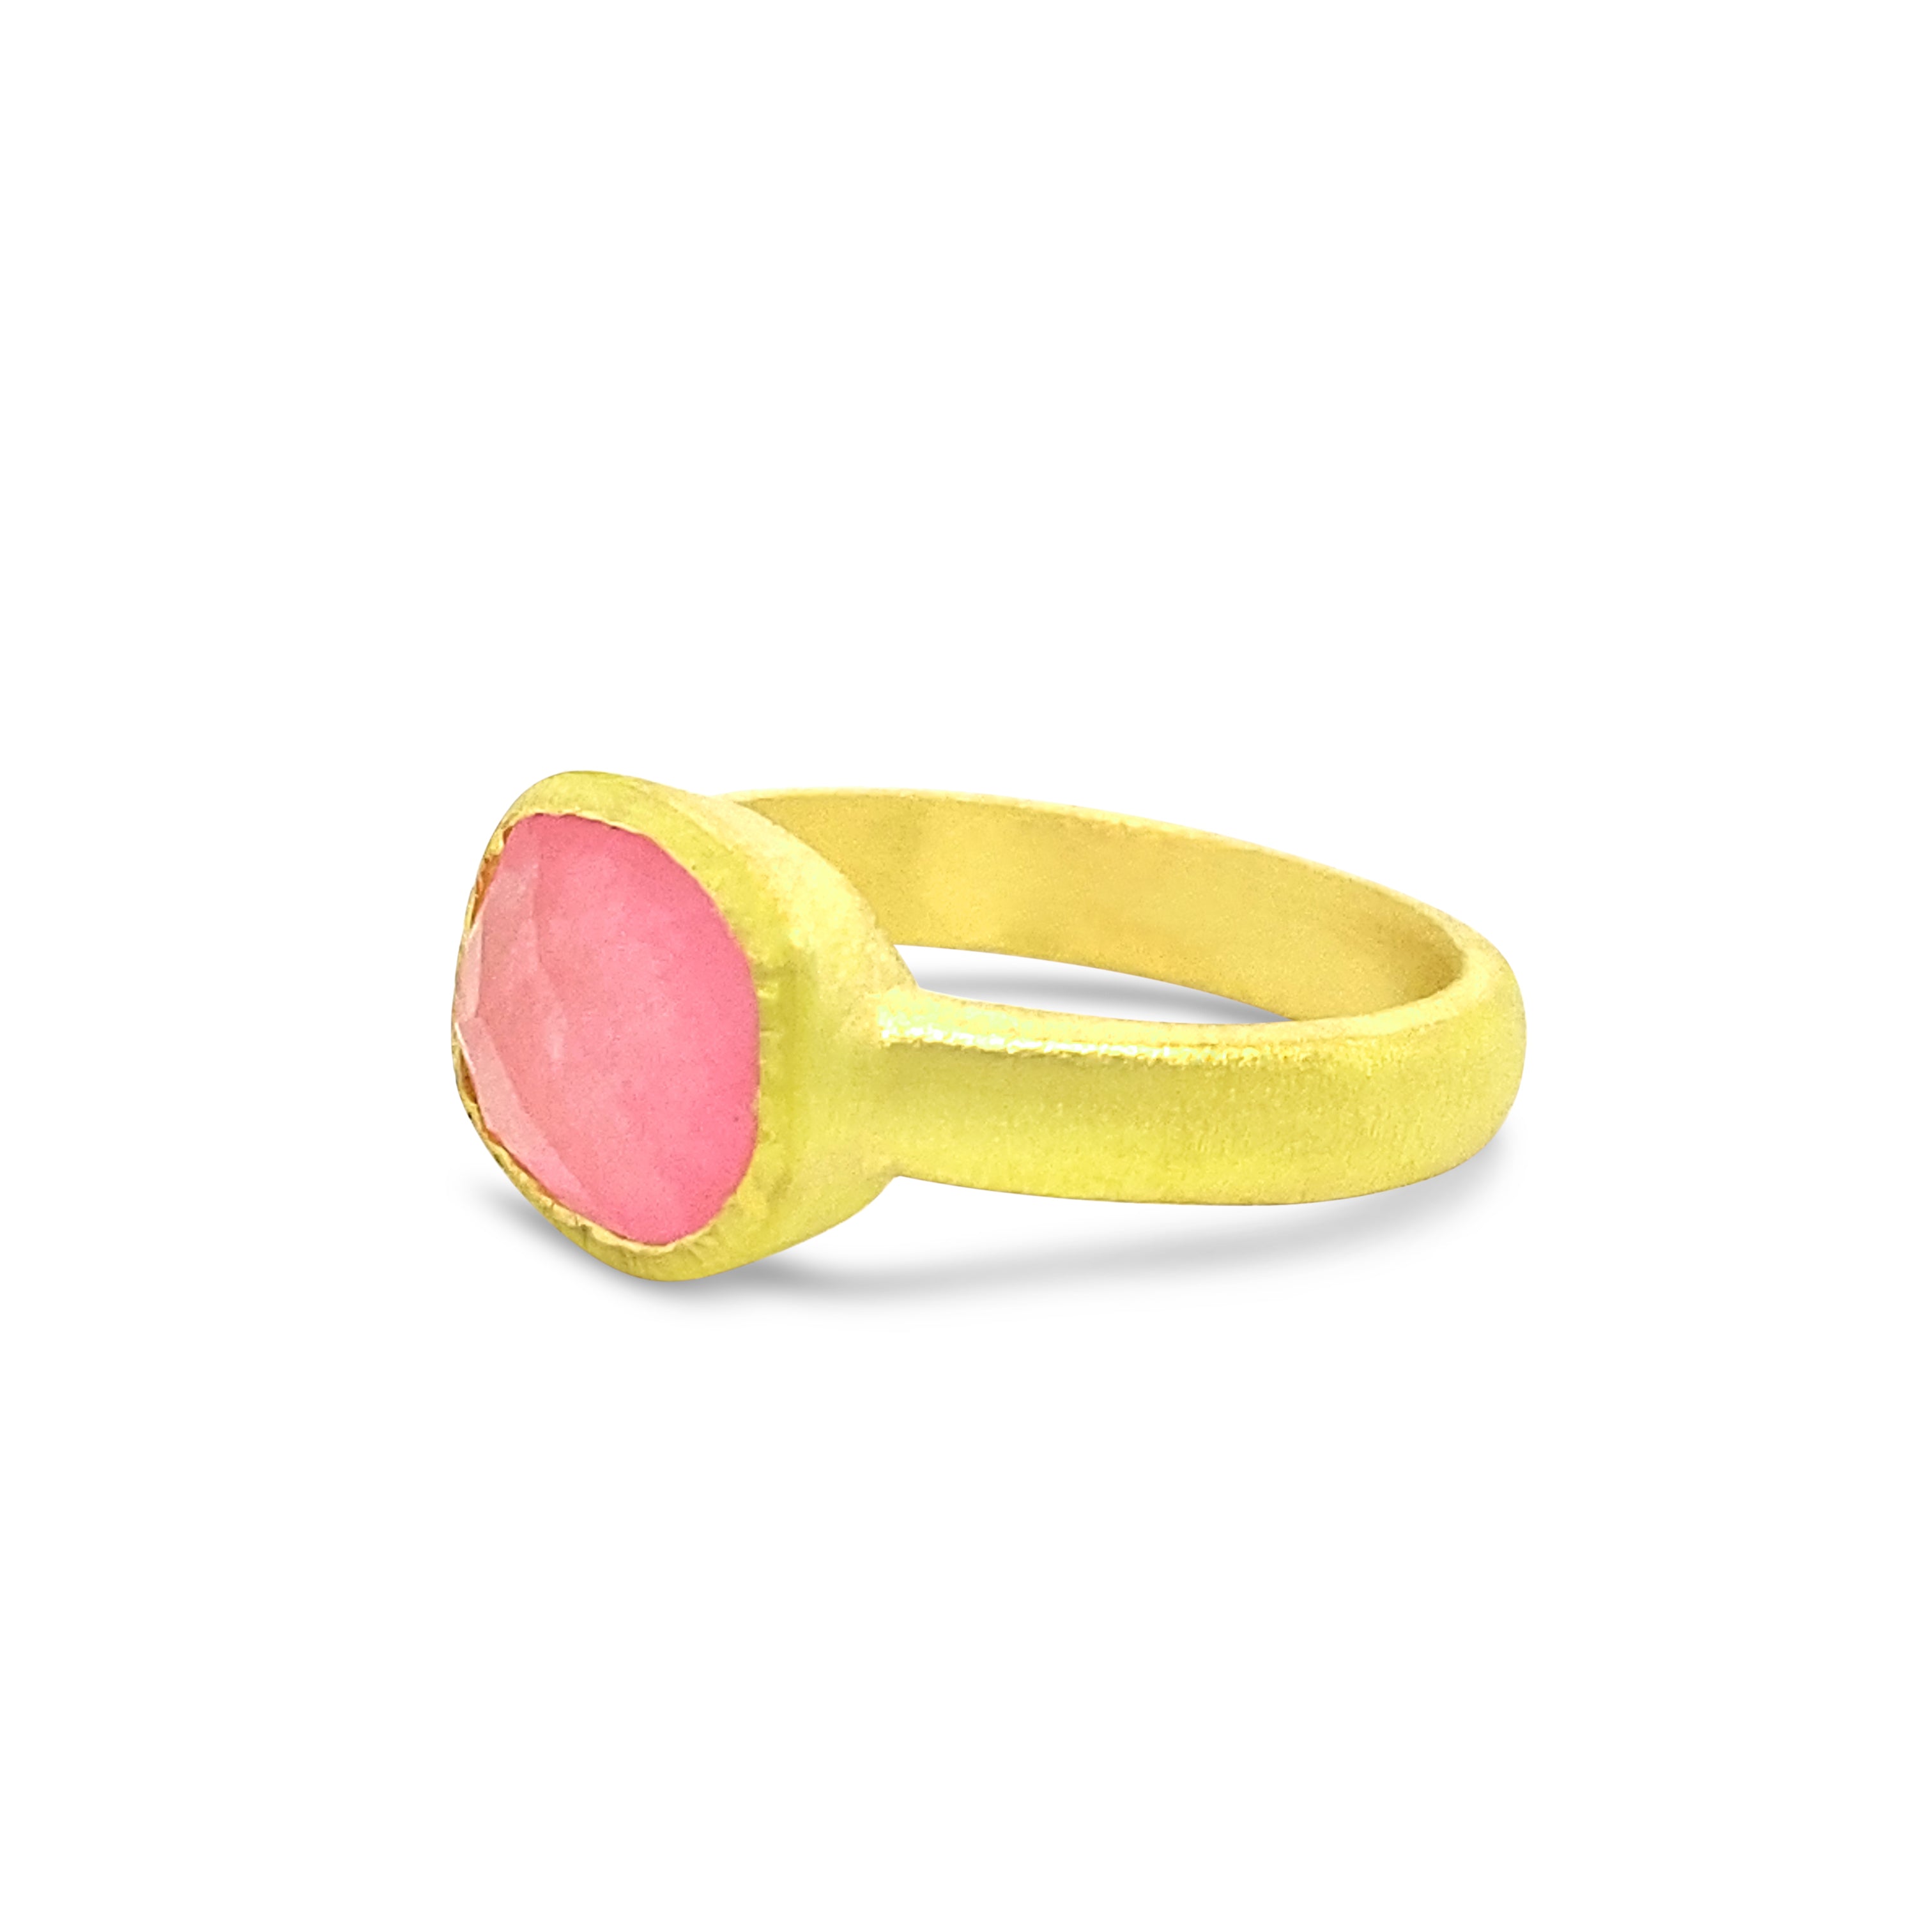 Paradise Ring in Pink